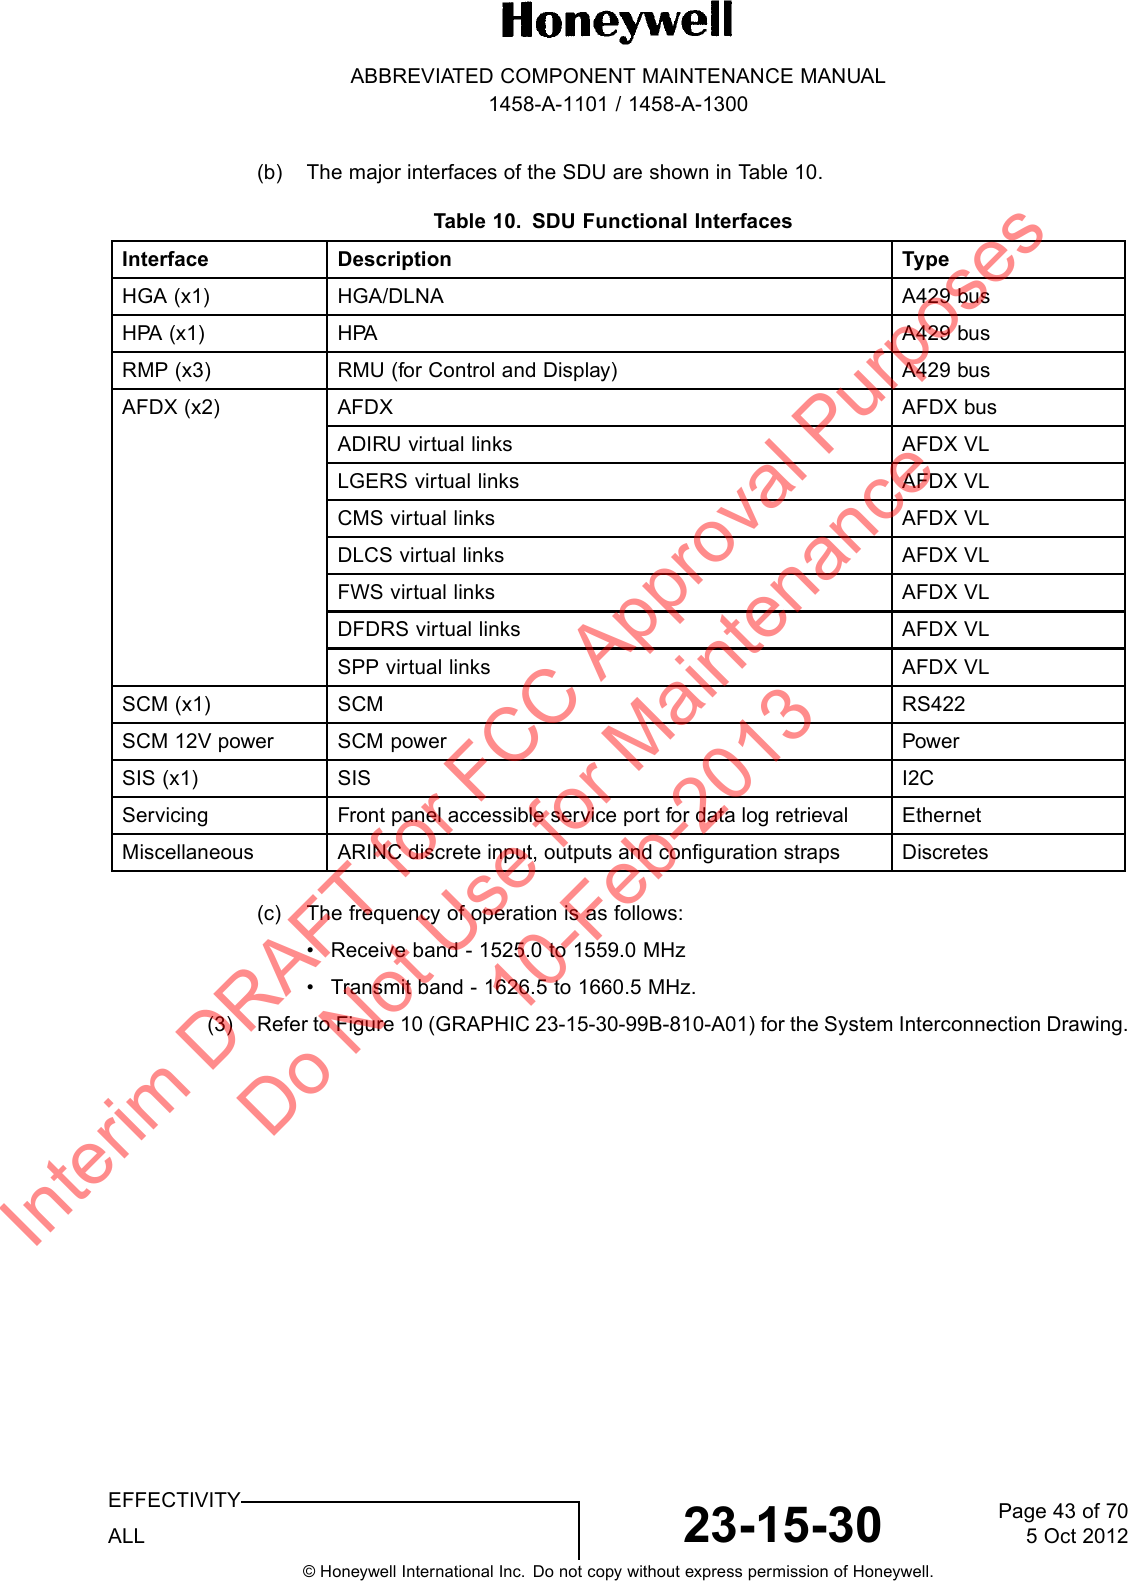 ABBREVIATED COMPONENT MAINTENANCE MANUAL1458-A-1101 / 1458-A-1300(b) The major interfaces of the SDU are shown in Table 10.Table 10. SDU Functional InterfacesInterface Description TypeHGA (x1) HGA/DLNA A429 busHPA (x1) HPA A429 busRMP (x3) RMU (for Control and Display) A429 busAFDX (x2) AFDX AFDX busADIRU virtual links AFDX VLLGERS virtual links AFDX VLCMS virtual links AFDX VLDLCS virtual links AFDX VLFWS virtual links AFDX VLDFDRS virtual links AFDX VLSPP virtual links AFDX VLSCM (x1) SCM RS422SCM 12V power SCM power PowerSIS (x1) SIS I2CServicing Front panel accessible service port for data log retrieval EthernetMiscellaneous ARINC discrete input, outputs and configuration straps Discretes(c) The frequency of operation is as follows:• Receive band - 1525.0 to 1559.0 MHz• Transmit band - 1626.5 to 1660.5 MHz.(3) Refer to Figure 10 (GRAPHIC 23-15-30-99B-810-A01) for the System Interconnection Drawing.EFFECTIVITYALL 23-15-30 Page 43 of 705 Oct 2012© Honeywell International Inc. Do not copy without express permission of Honeywell.Interim DRAFT for FCC Approval Purposes Do Not Use for Maintenance 10-Feb-2013